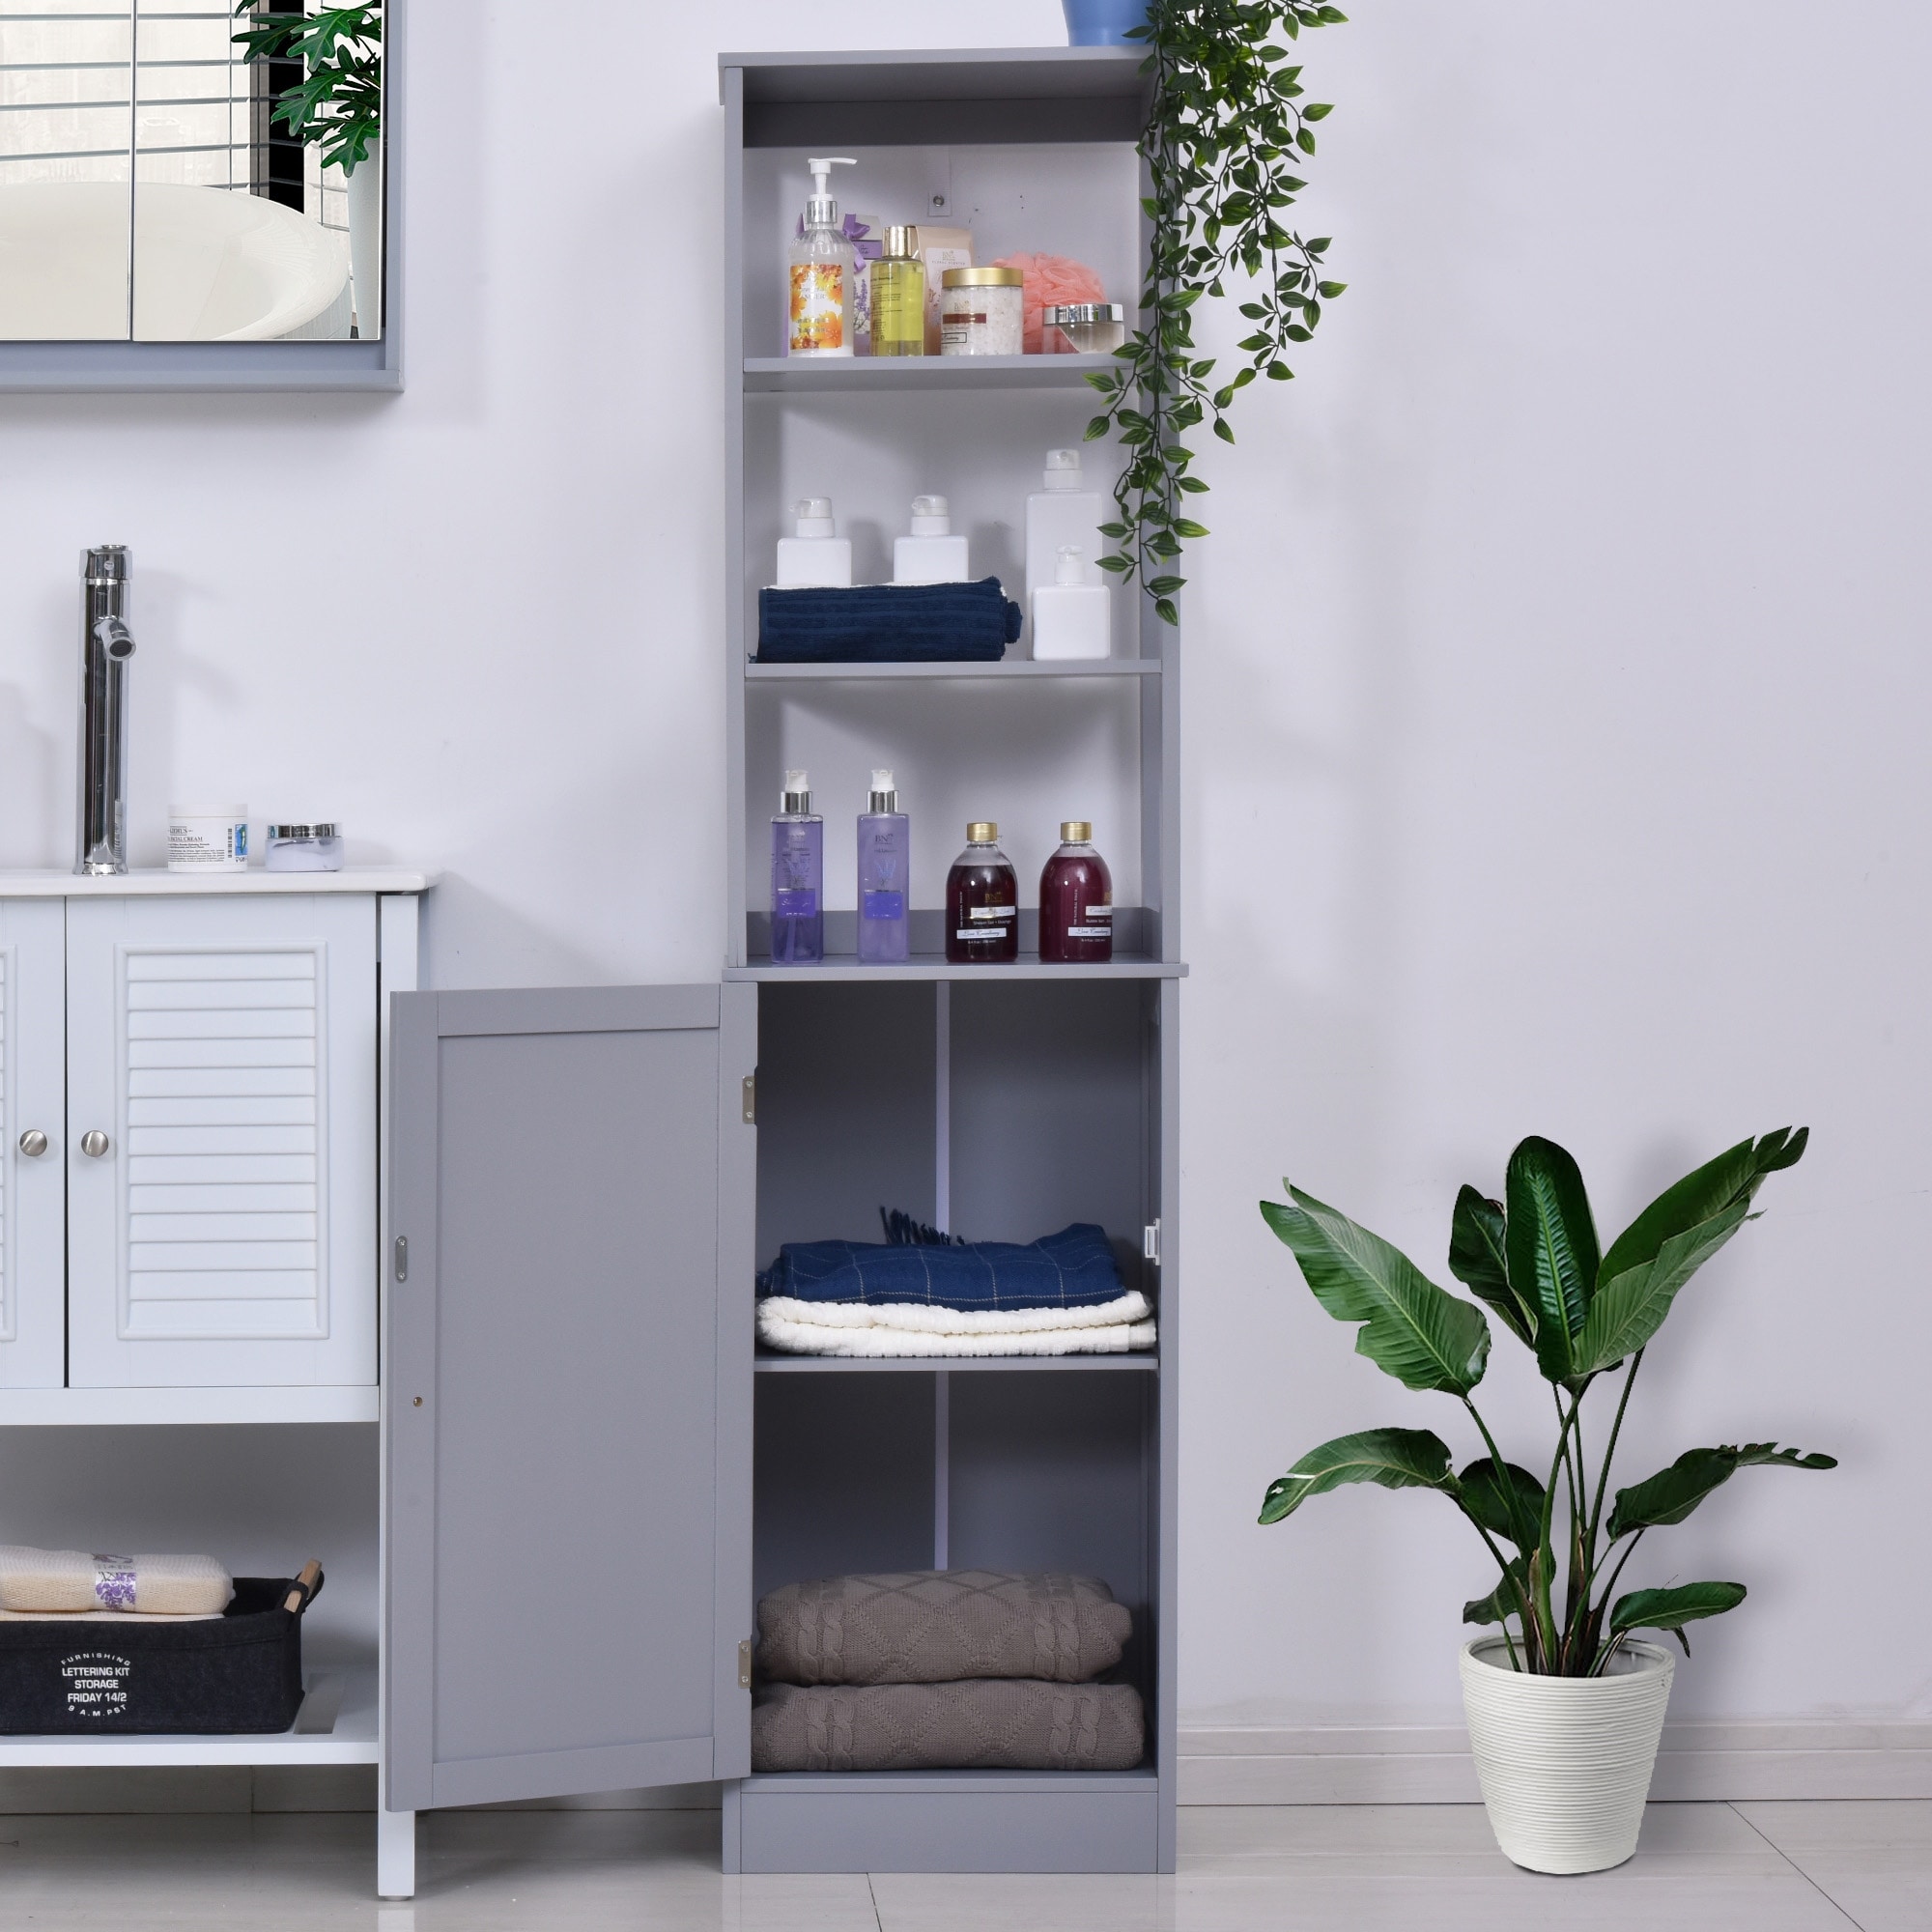 https://ak1.ostkcdn.com/images/products/is/images/direct/dba294a72ccaa713771a8cd78c214422697cbd68/kleankin-Freestanding-Bathroom-Tall-Storage-Cabinet-Organizer-Tower-with-Open-Shelves-%26-Compact-Design.jpg